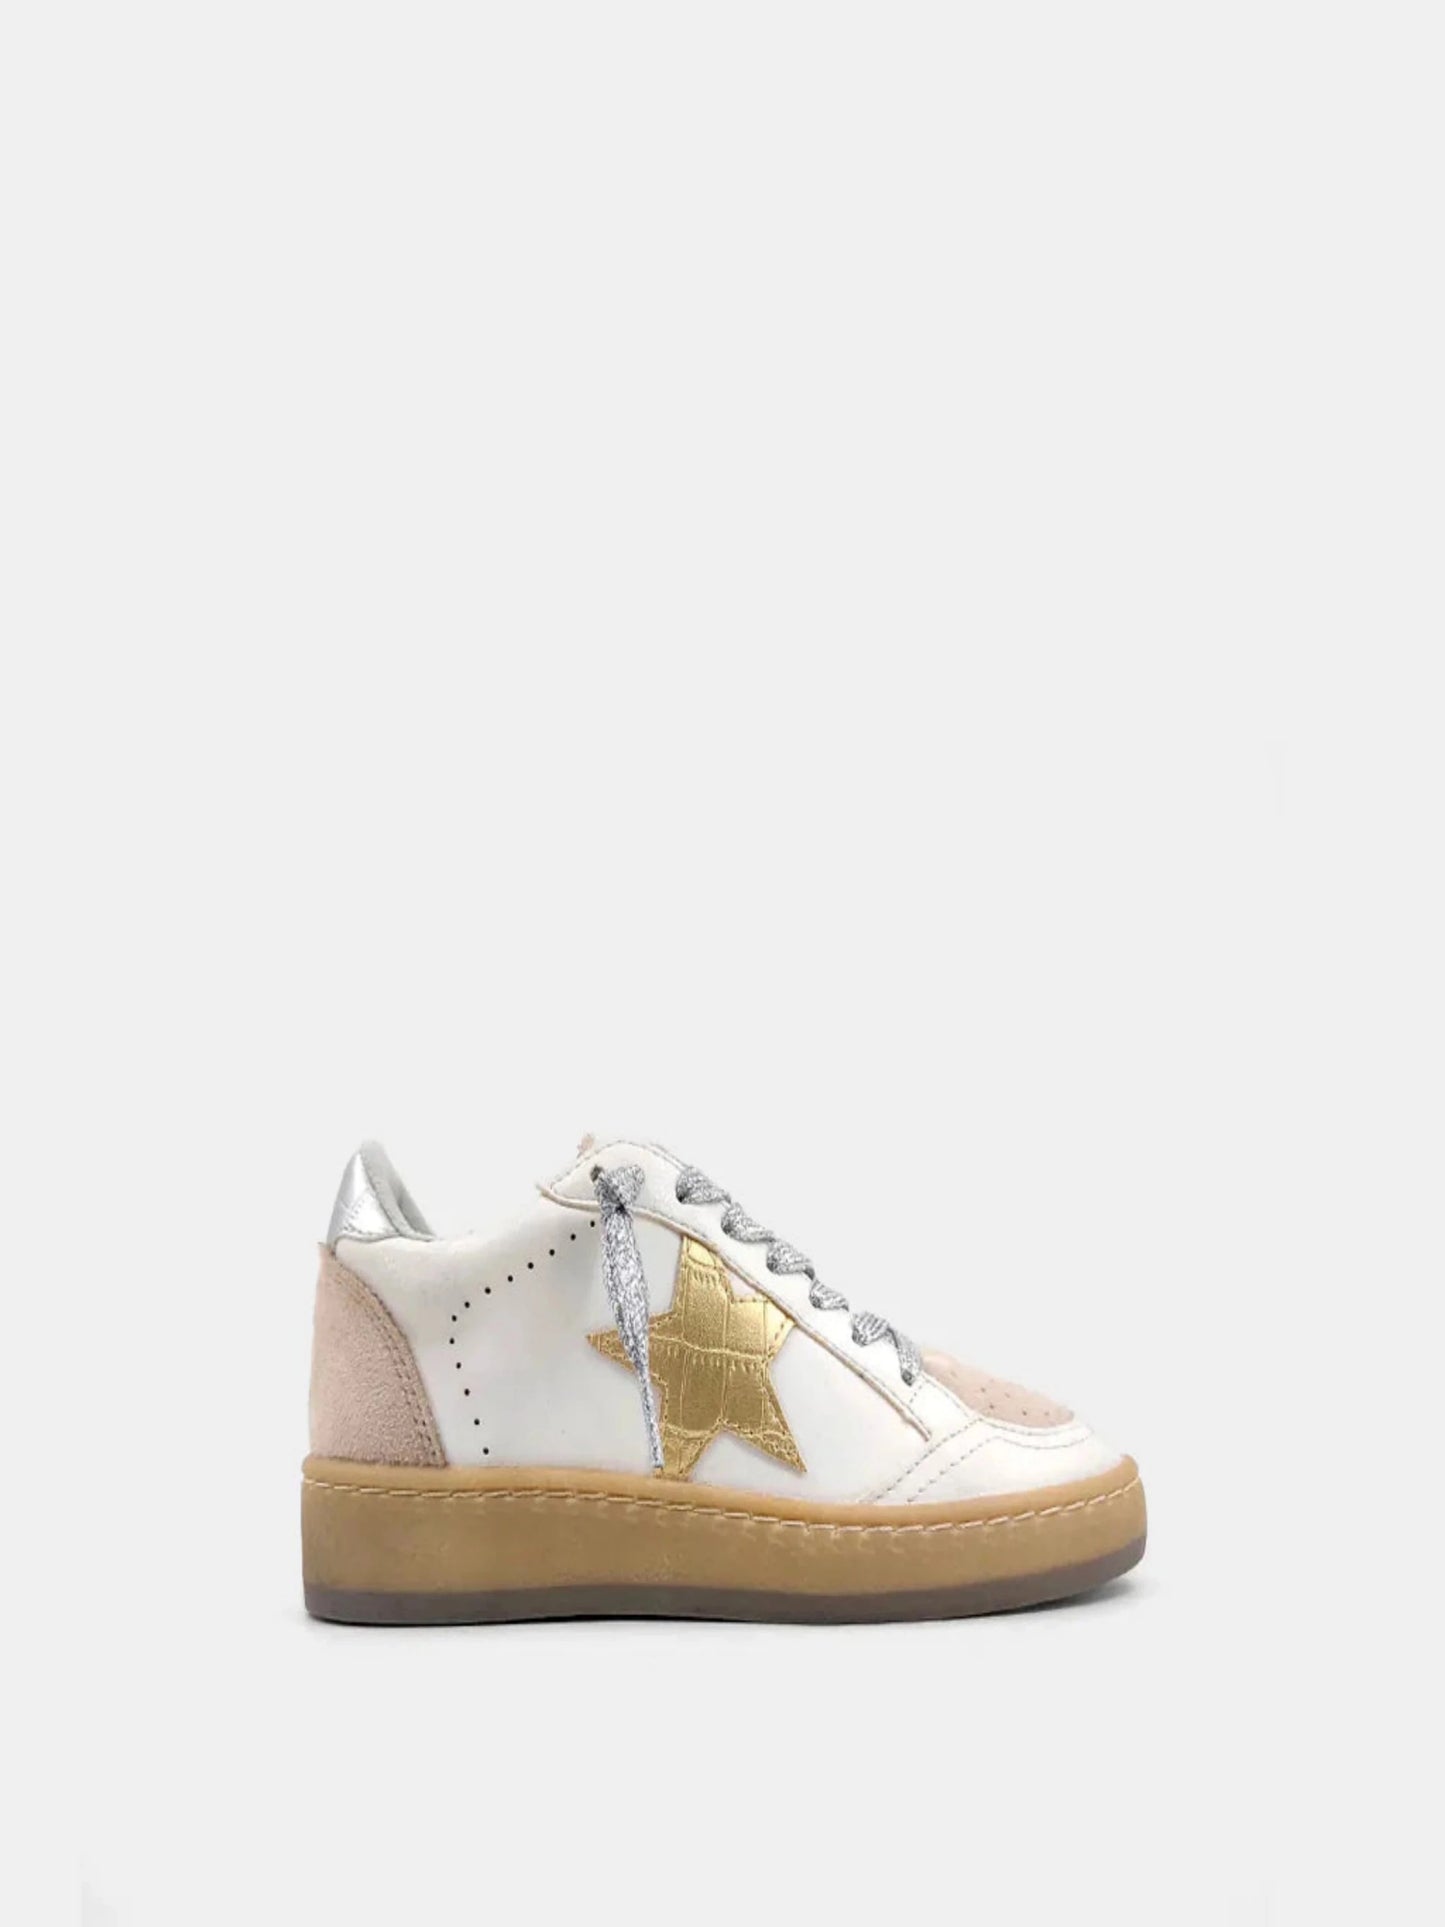 ROSALIA SNEAKER SUEDE LEATHER GOLD STAR - THE LITTLE EAGLE BOUTIQUE